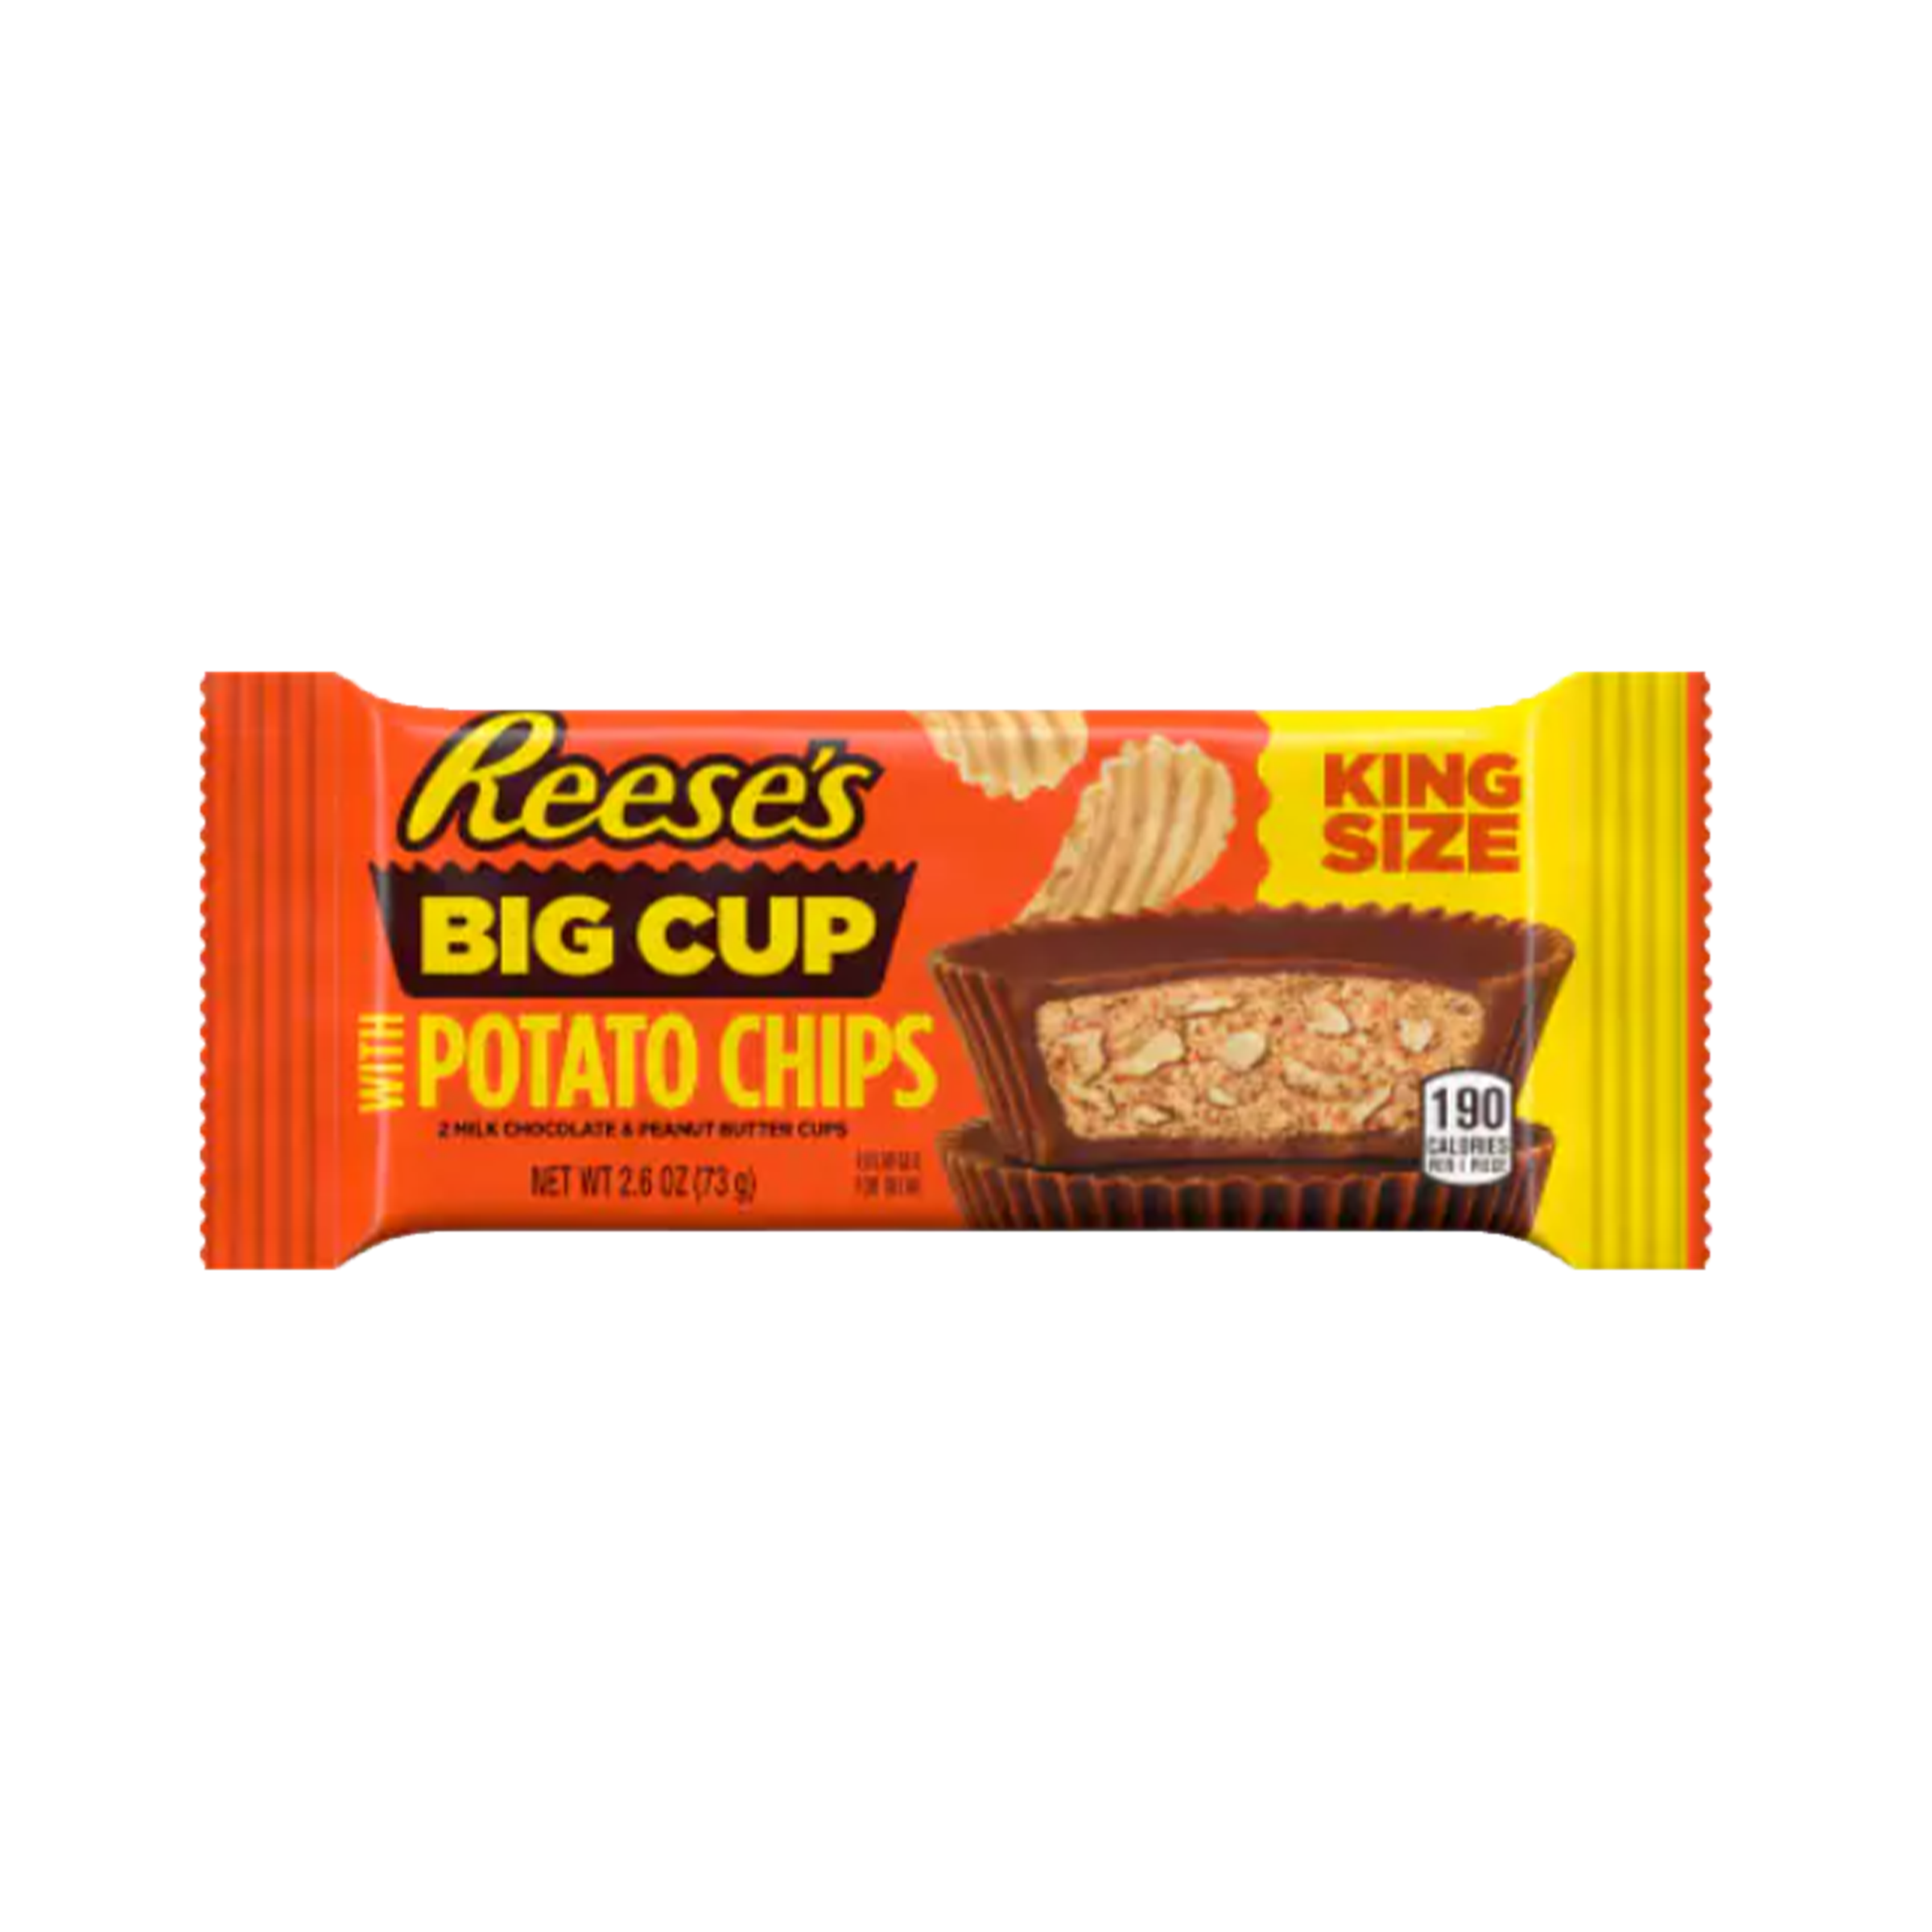 Reese's - Big Cups - Potato Chips